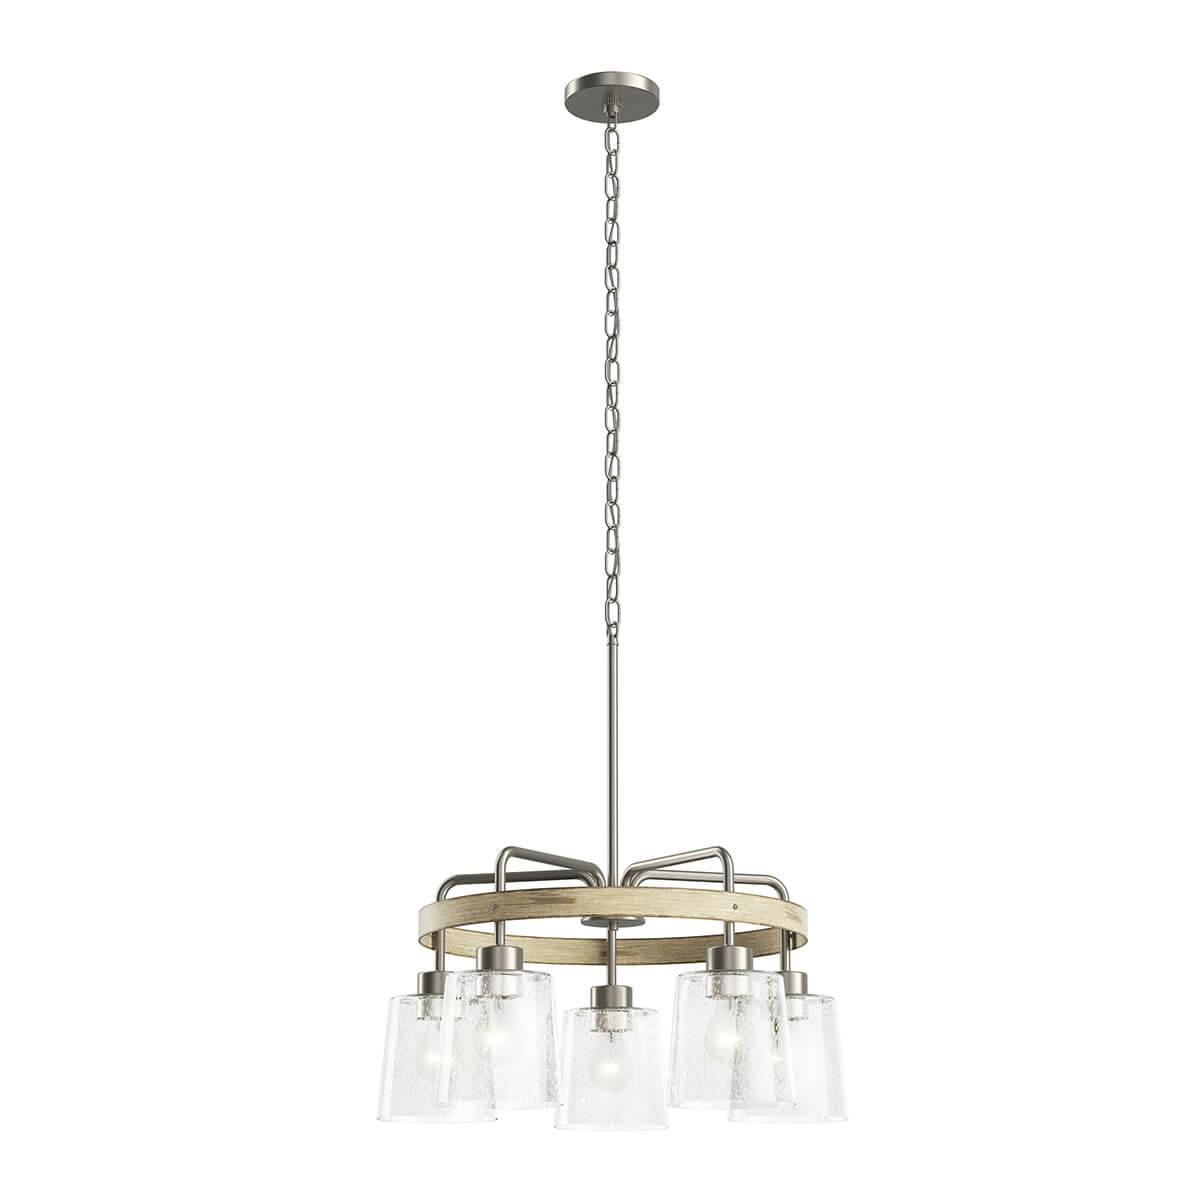 Bolson 24" 5 Light Chandelier Brushed Nickel on a white background